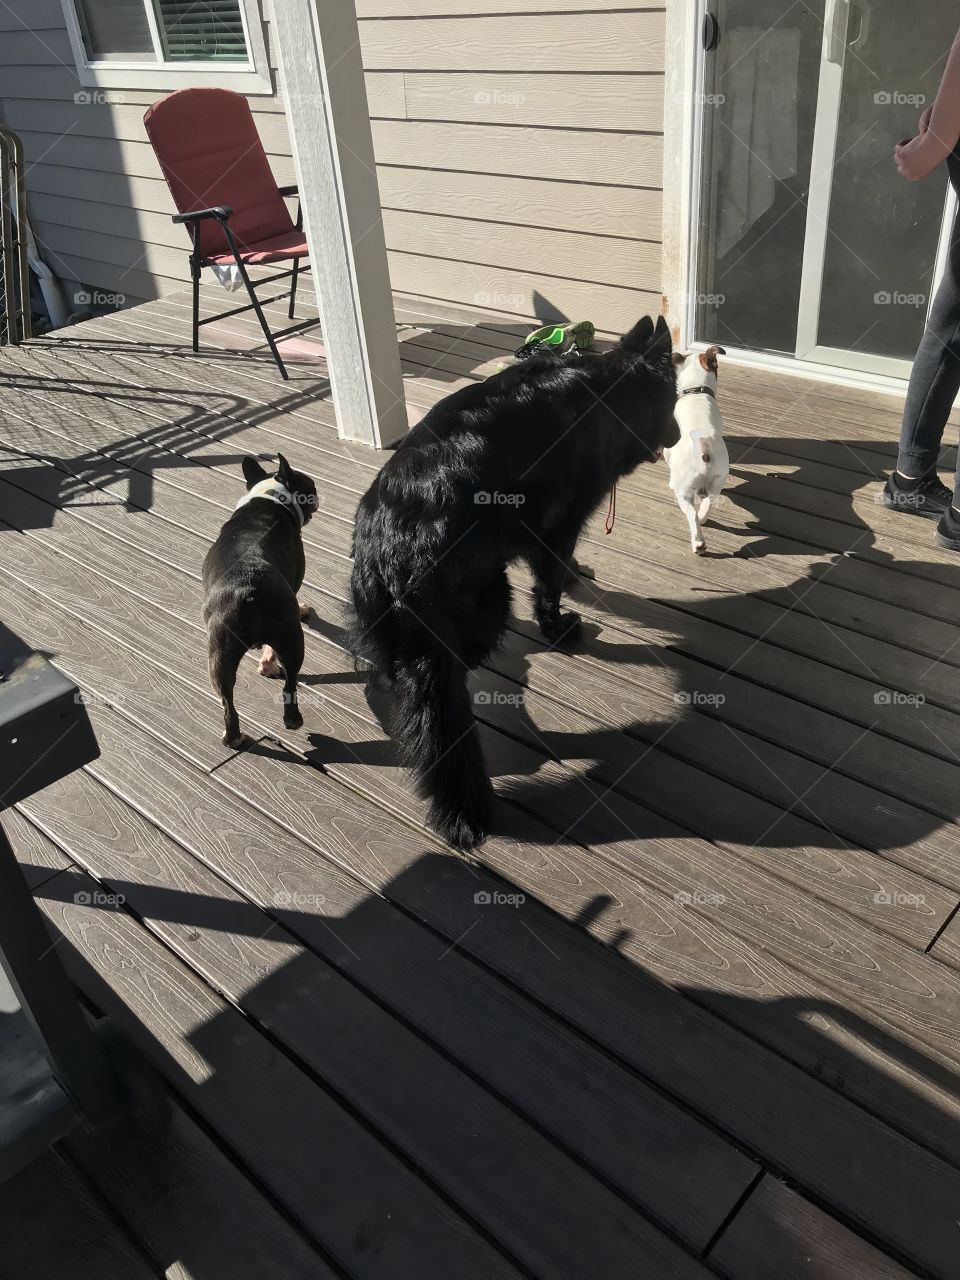 Dogs getting along on the porch, playing and walking around, german Shepherd Boston terrier and rat terrier